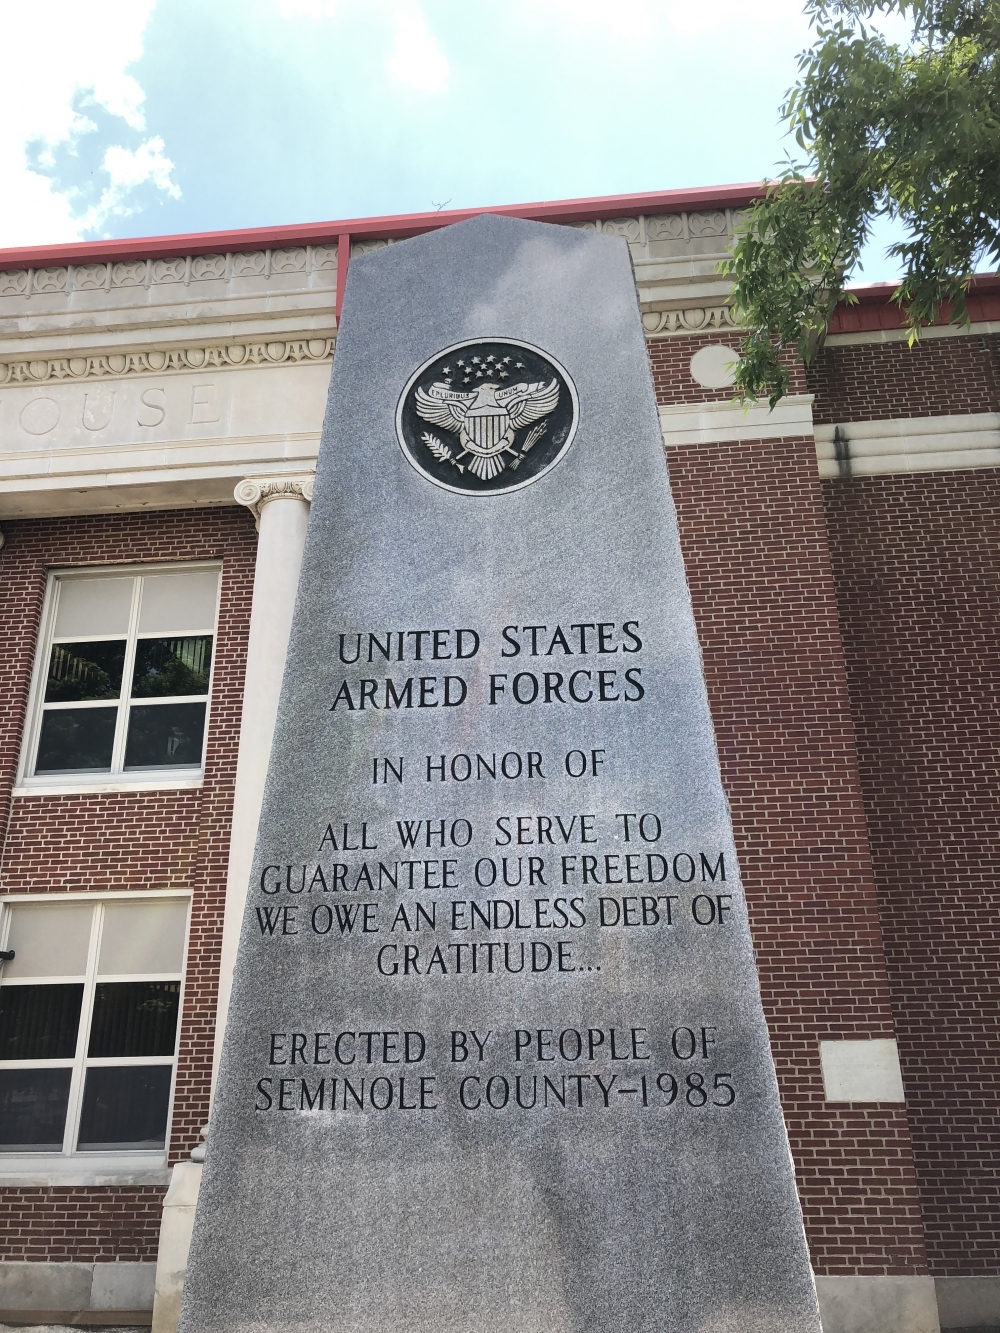 The United States Armed Forces Monument